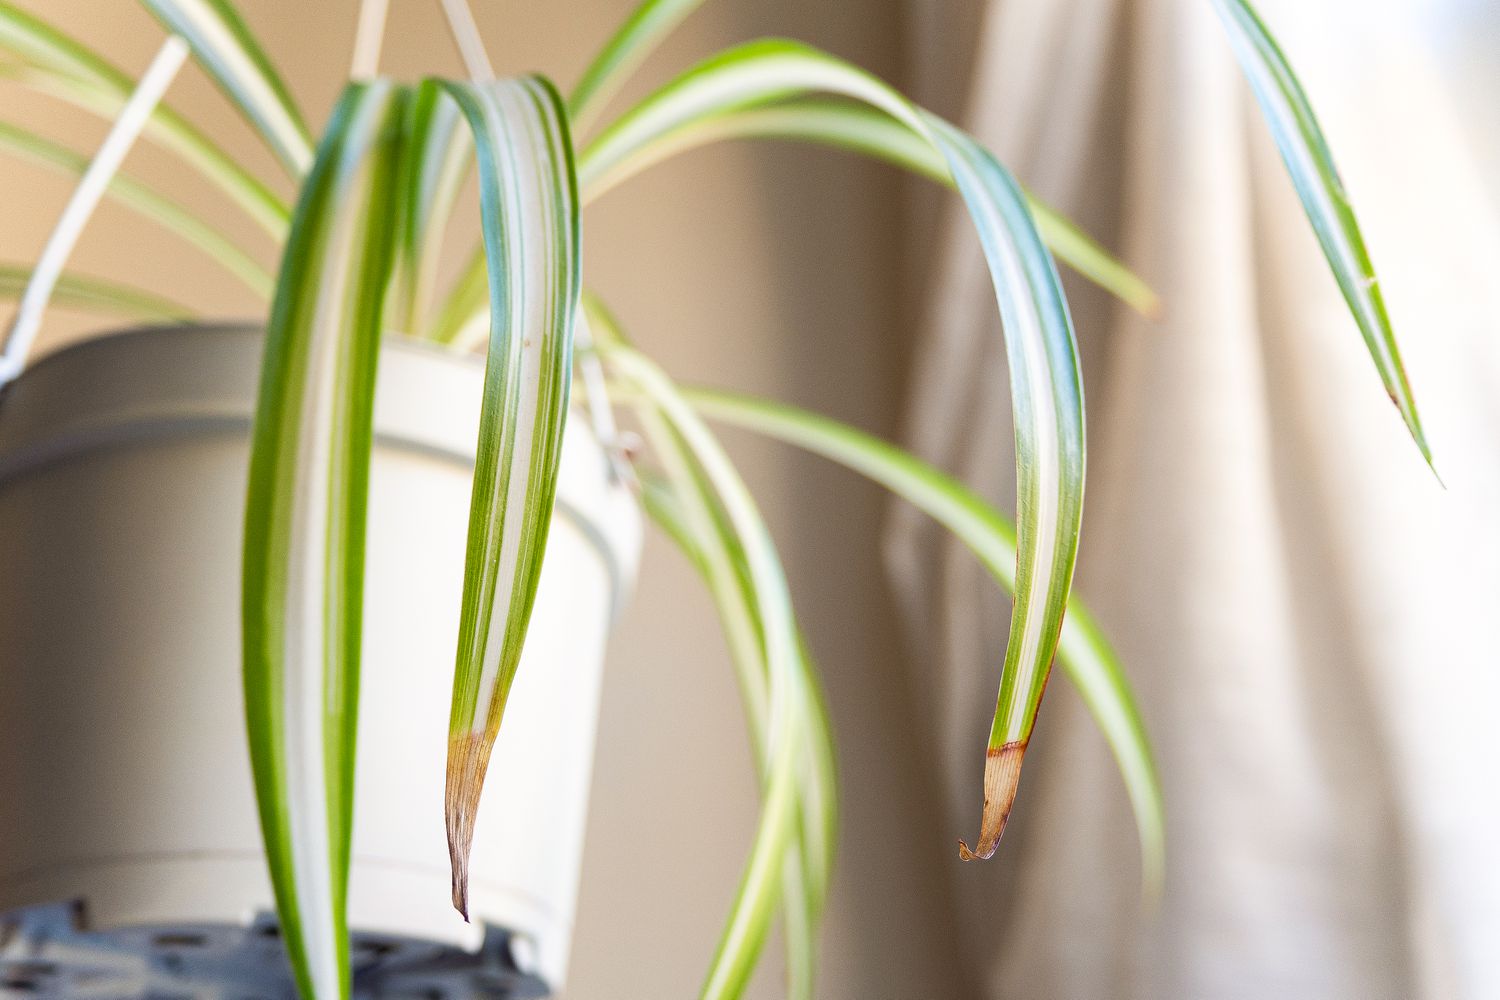 Reasons your spider plant has brown leaf tips